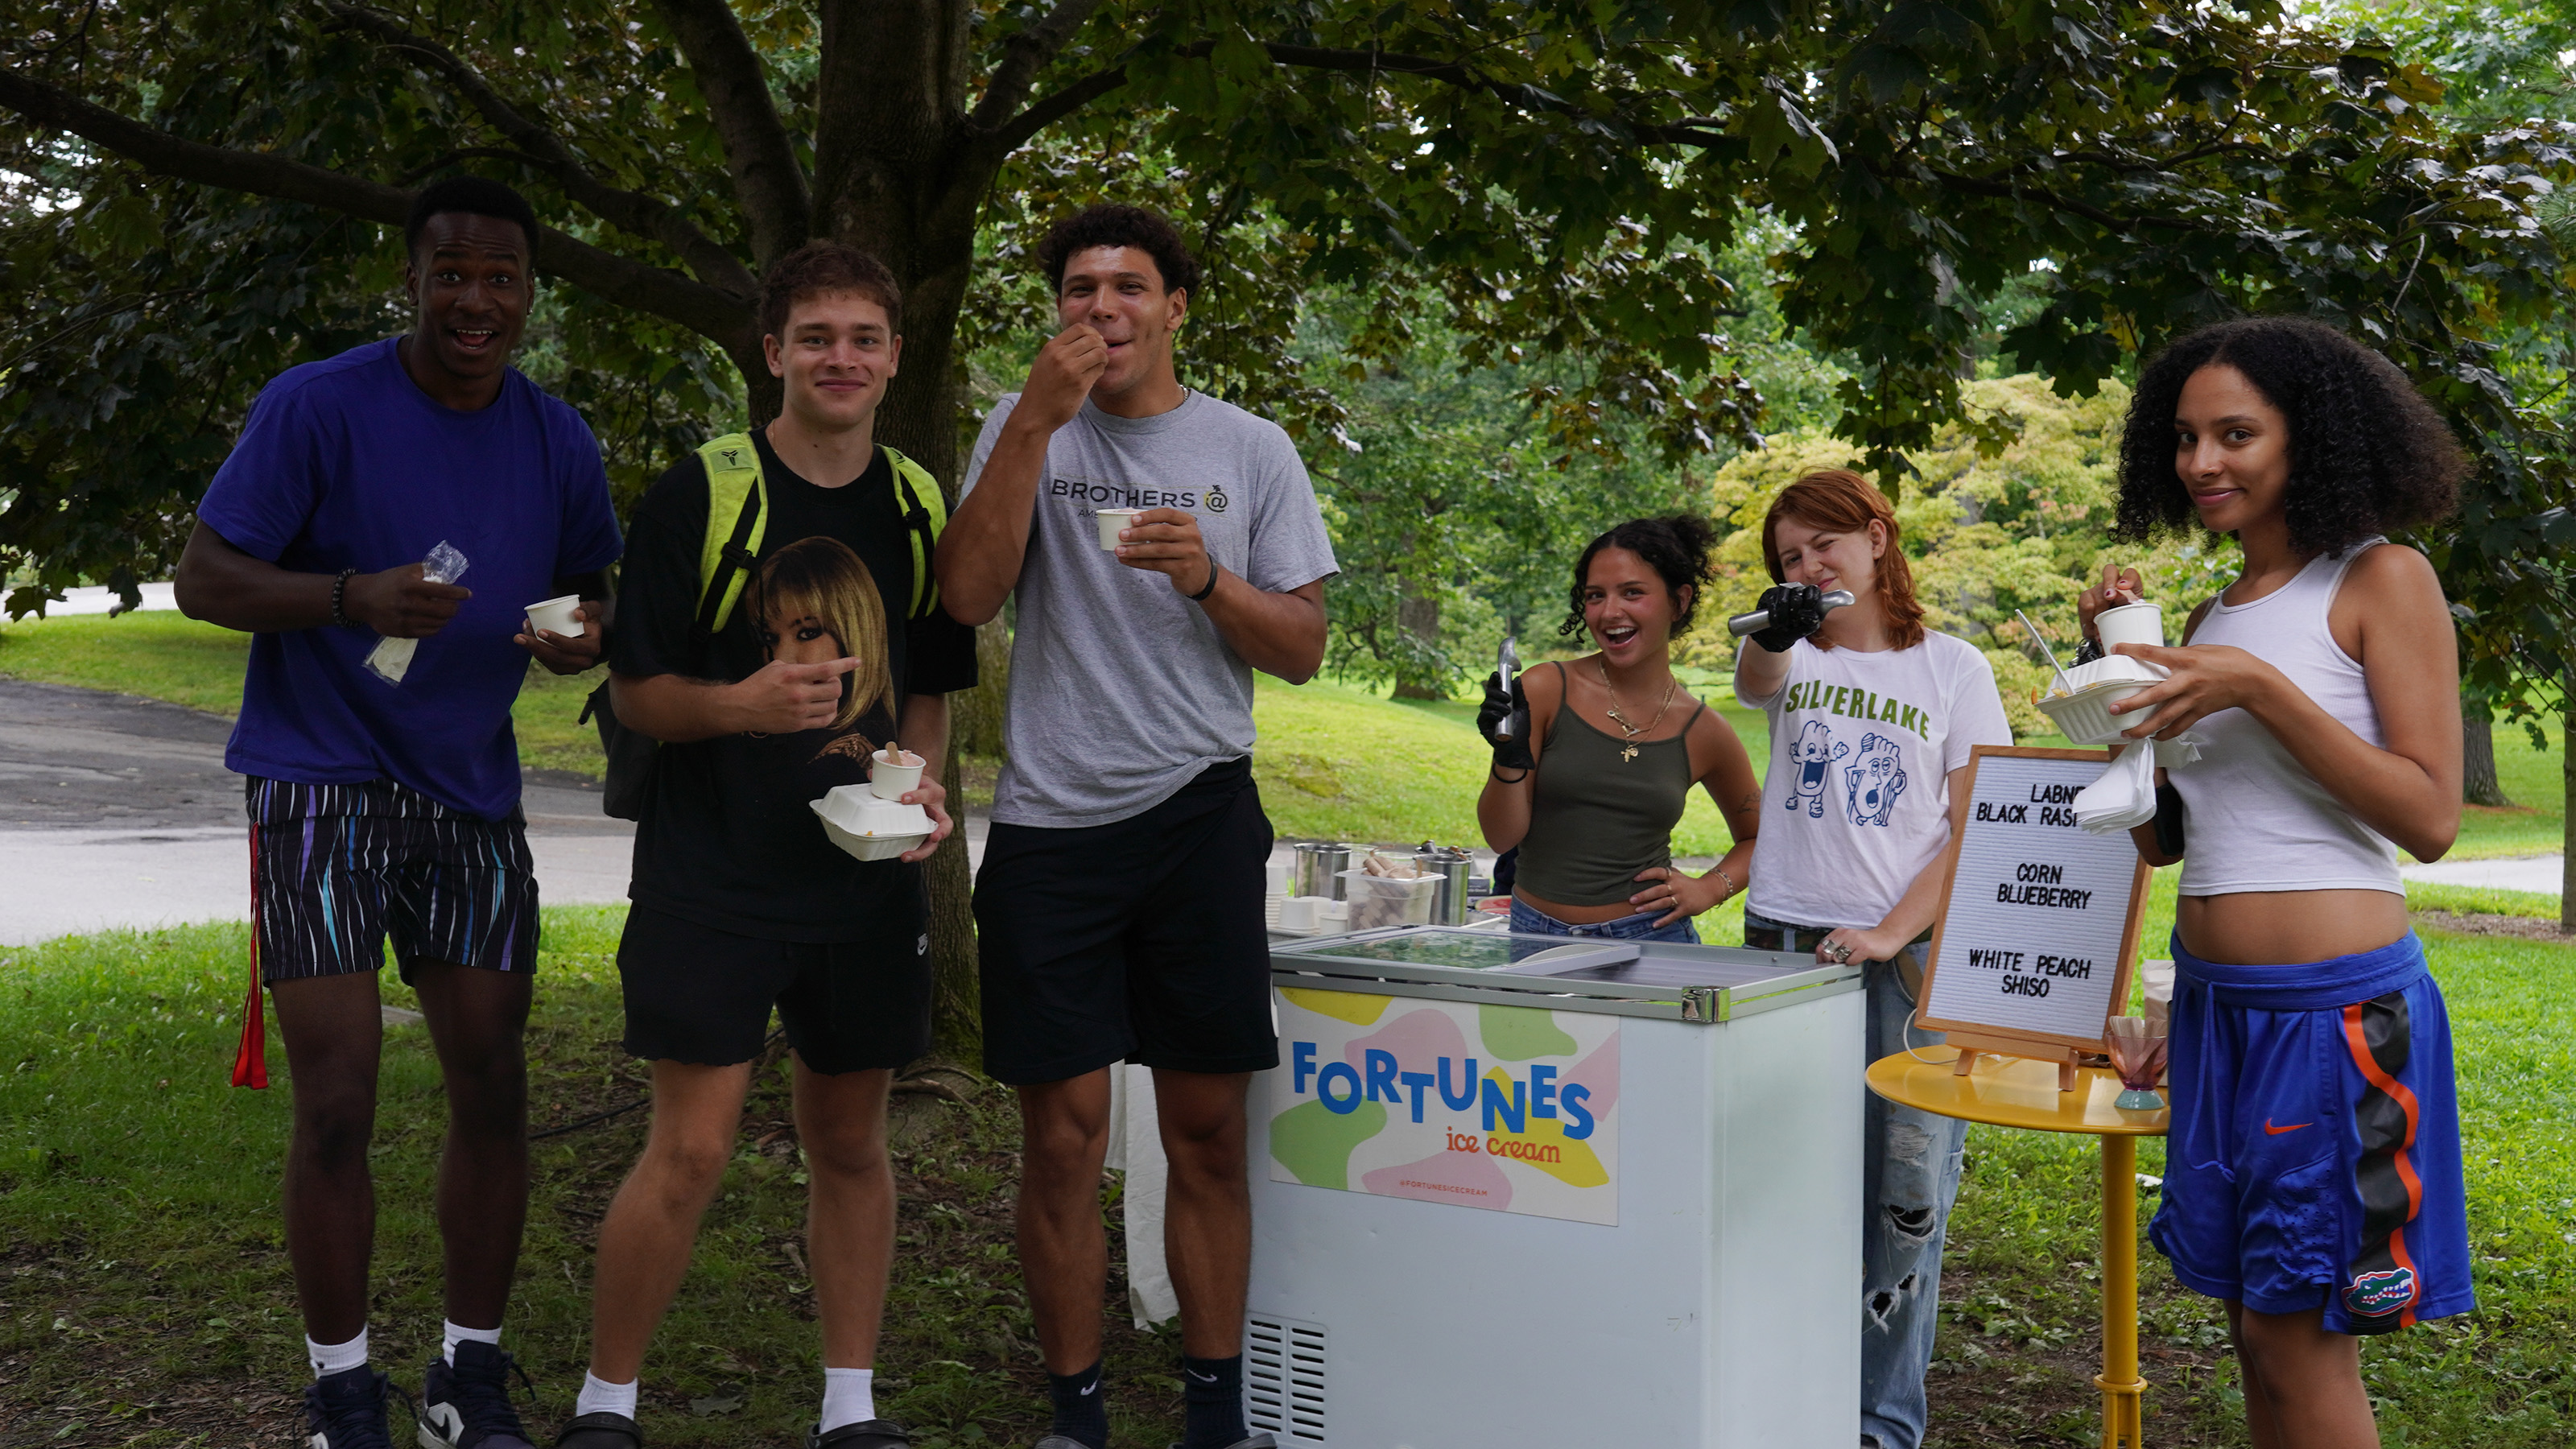 Bard students enjoying Fortune's ice cream (owned by Brian Ackley '02 and Lisa Farjam '00) at the CCE Block Party. Photo by Jonathan Asiedu '24